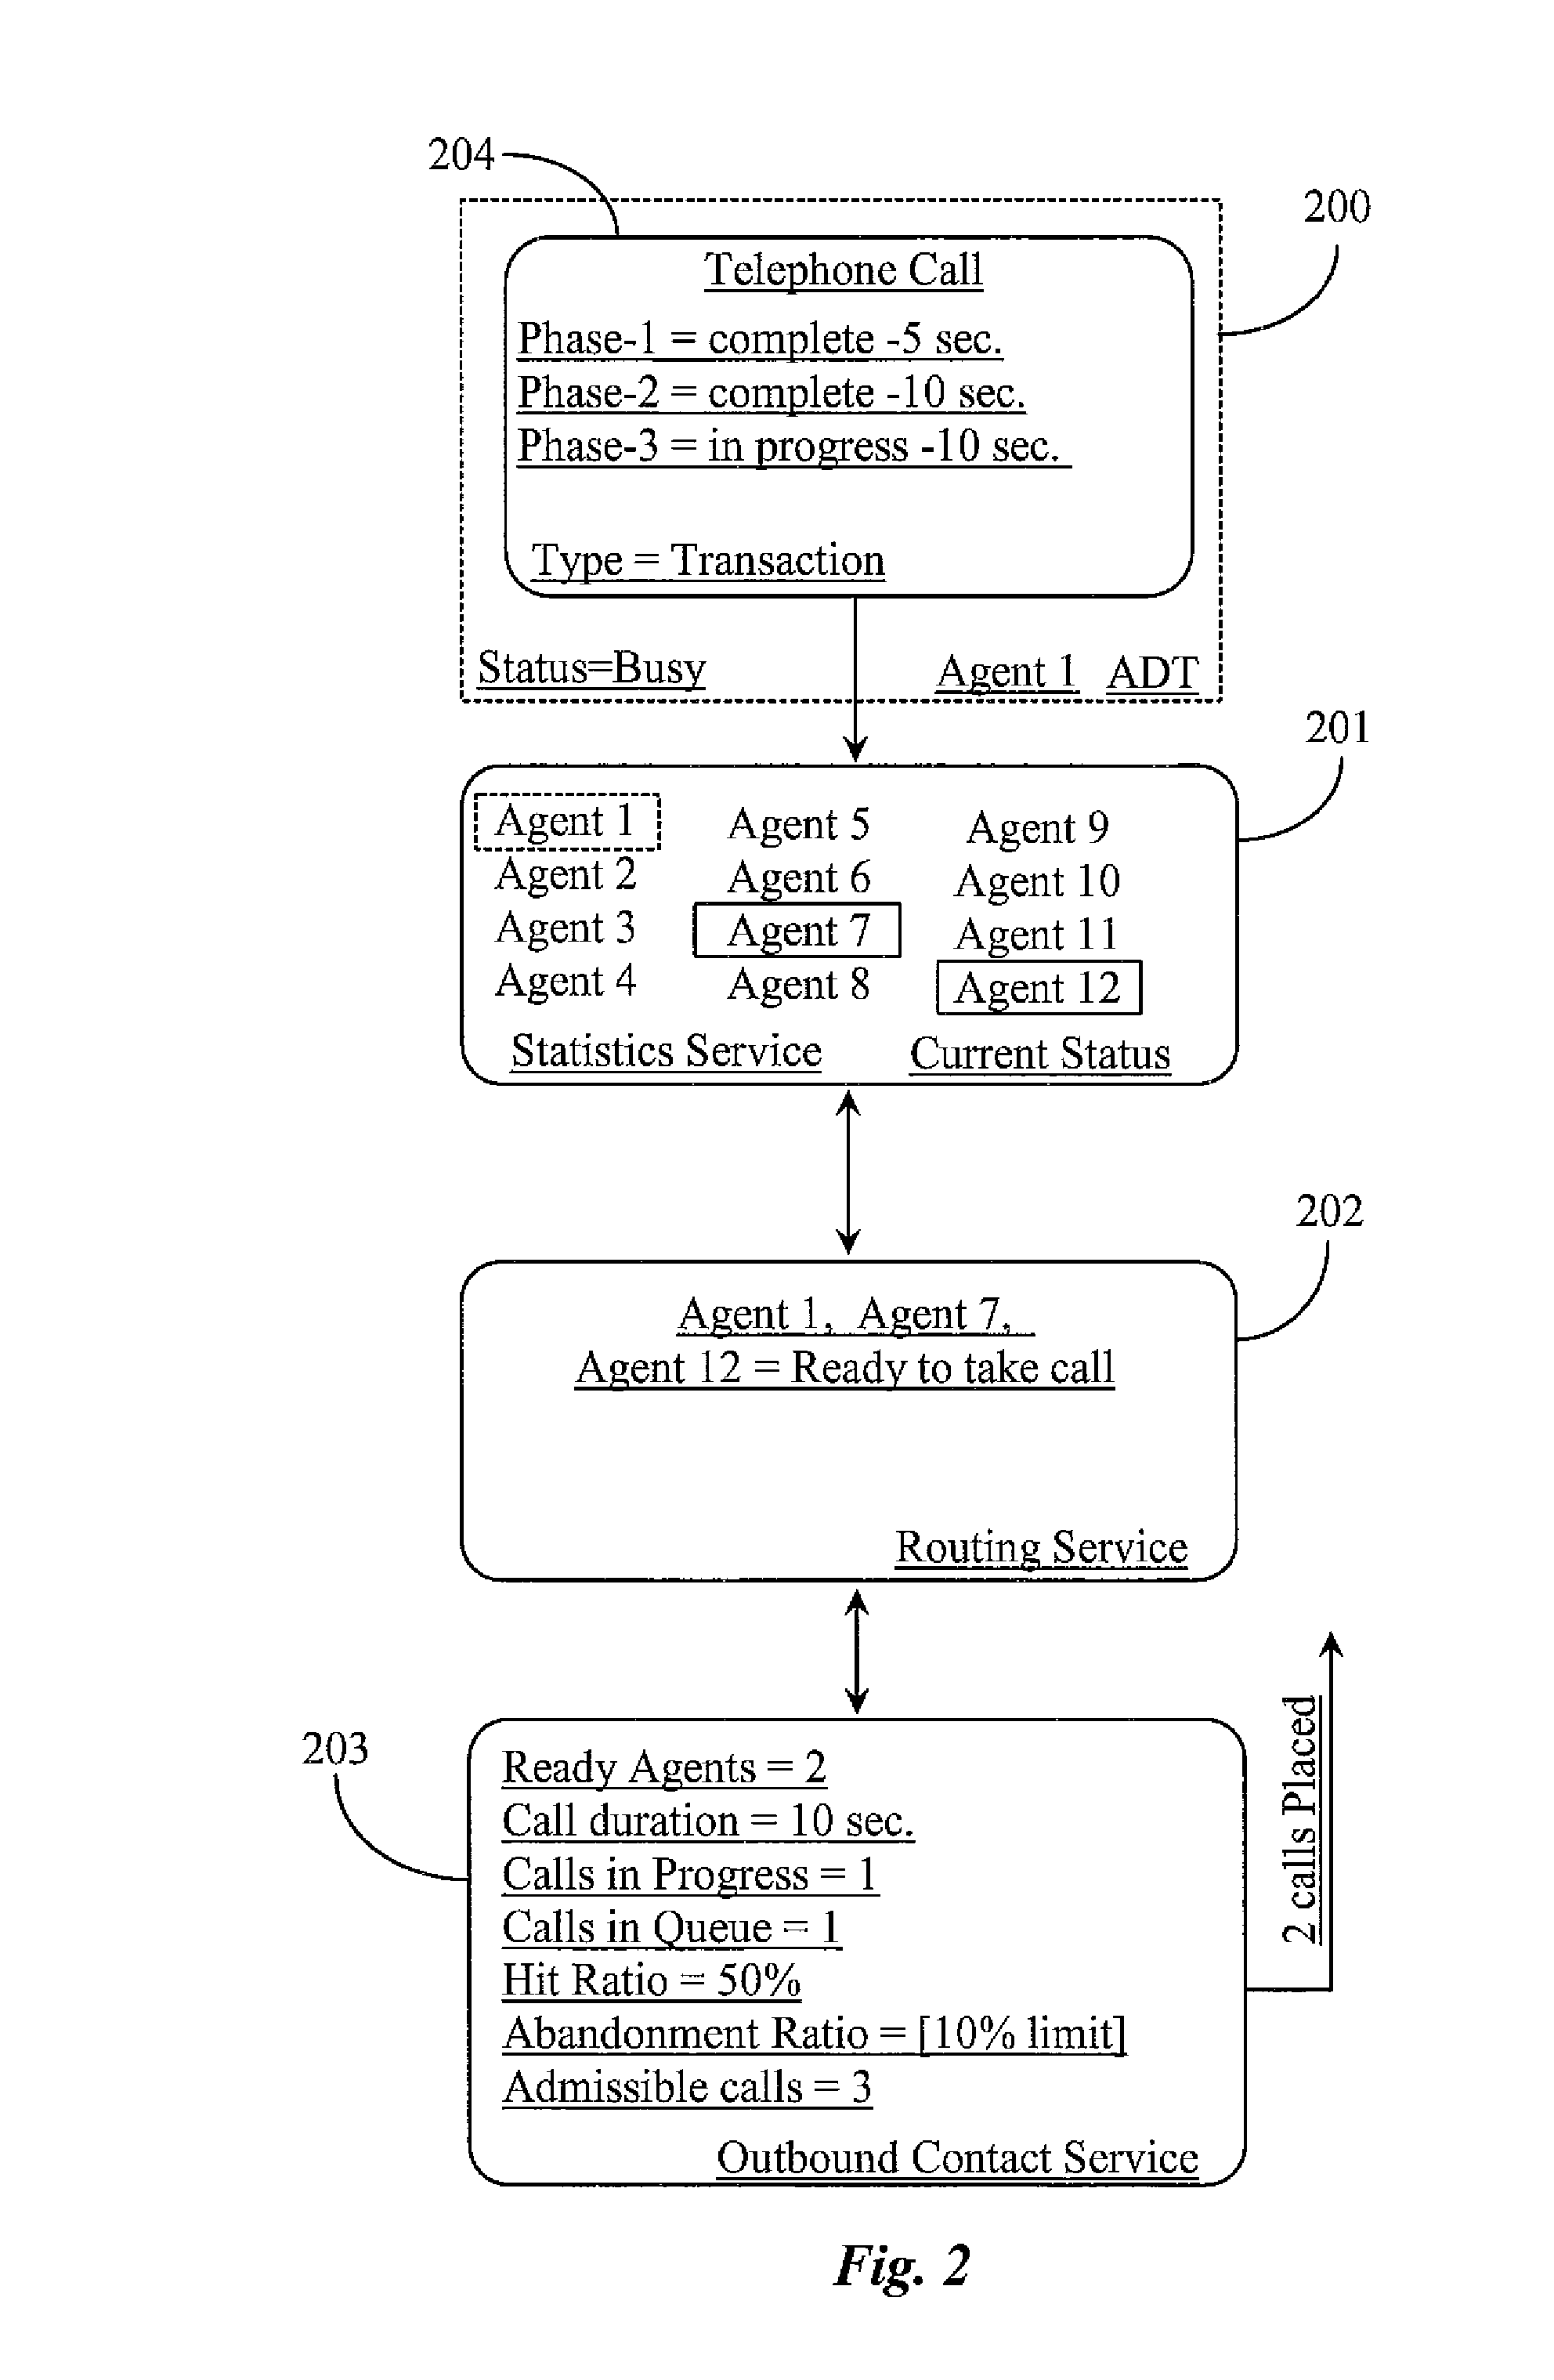 System and Methods for Predicting Future Agent Readiness for Handling an Interaction in a Call Center